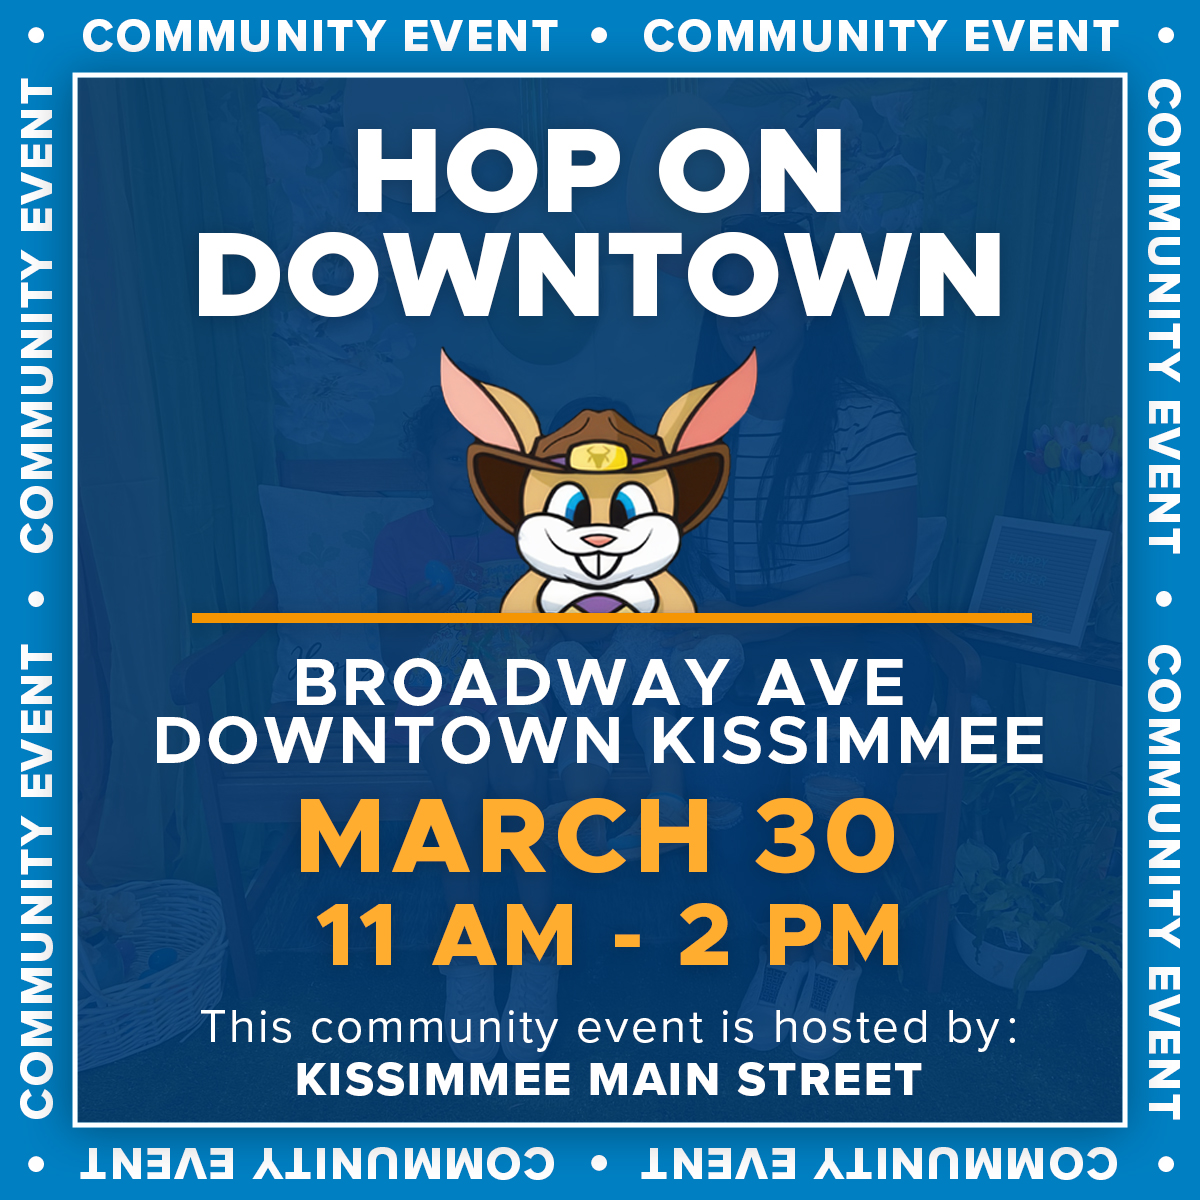 Hop on Downtown is a fun-filled Easter event in the heart of downtown Kissimmee that is perfect for the whole family! 🗓️ March 30 • 11 am - 2 pm 📍 Broadway - Downtown Kissimmee 📝 Hosted by Kissimmee Main Street